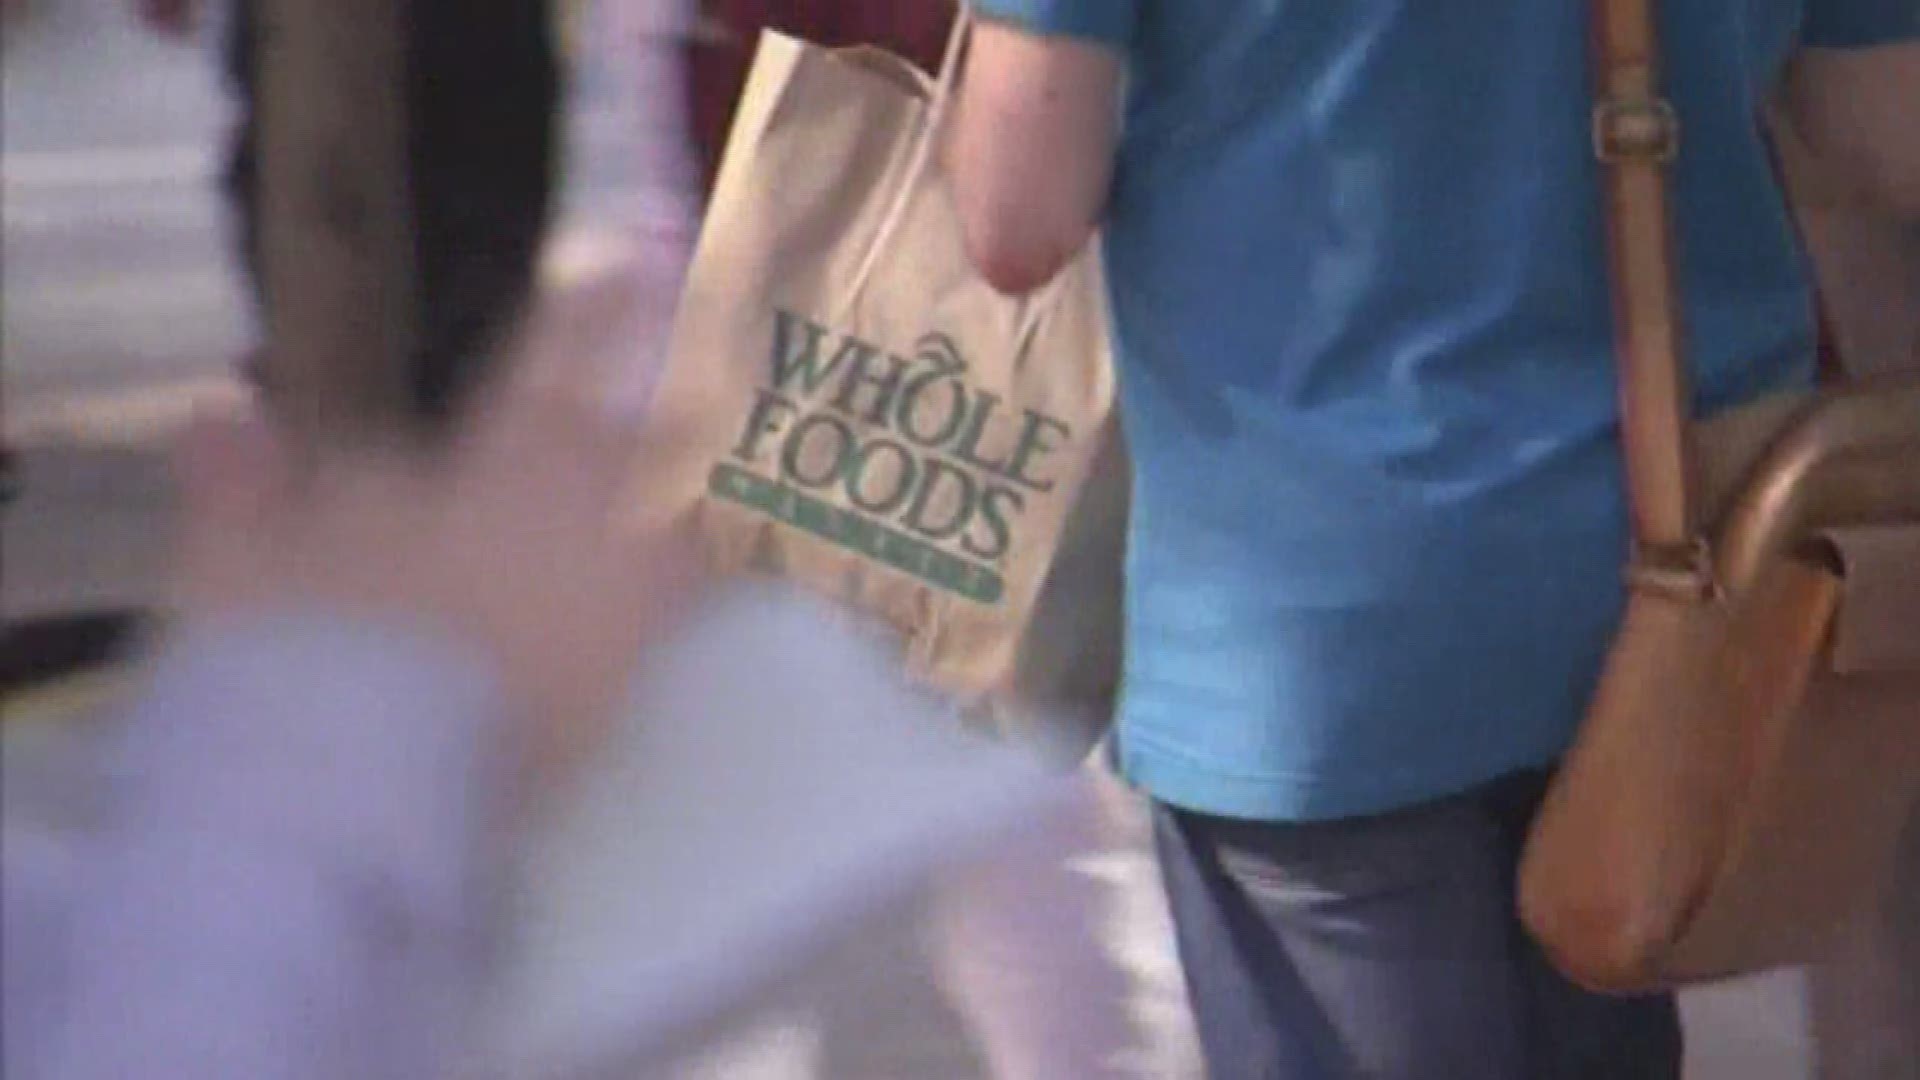 The online giant, Amazon, purchased the upscale organic grocery chain, Whole Foods.